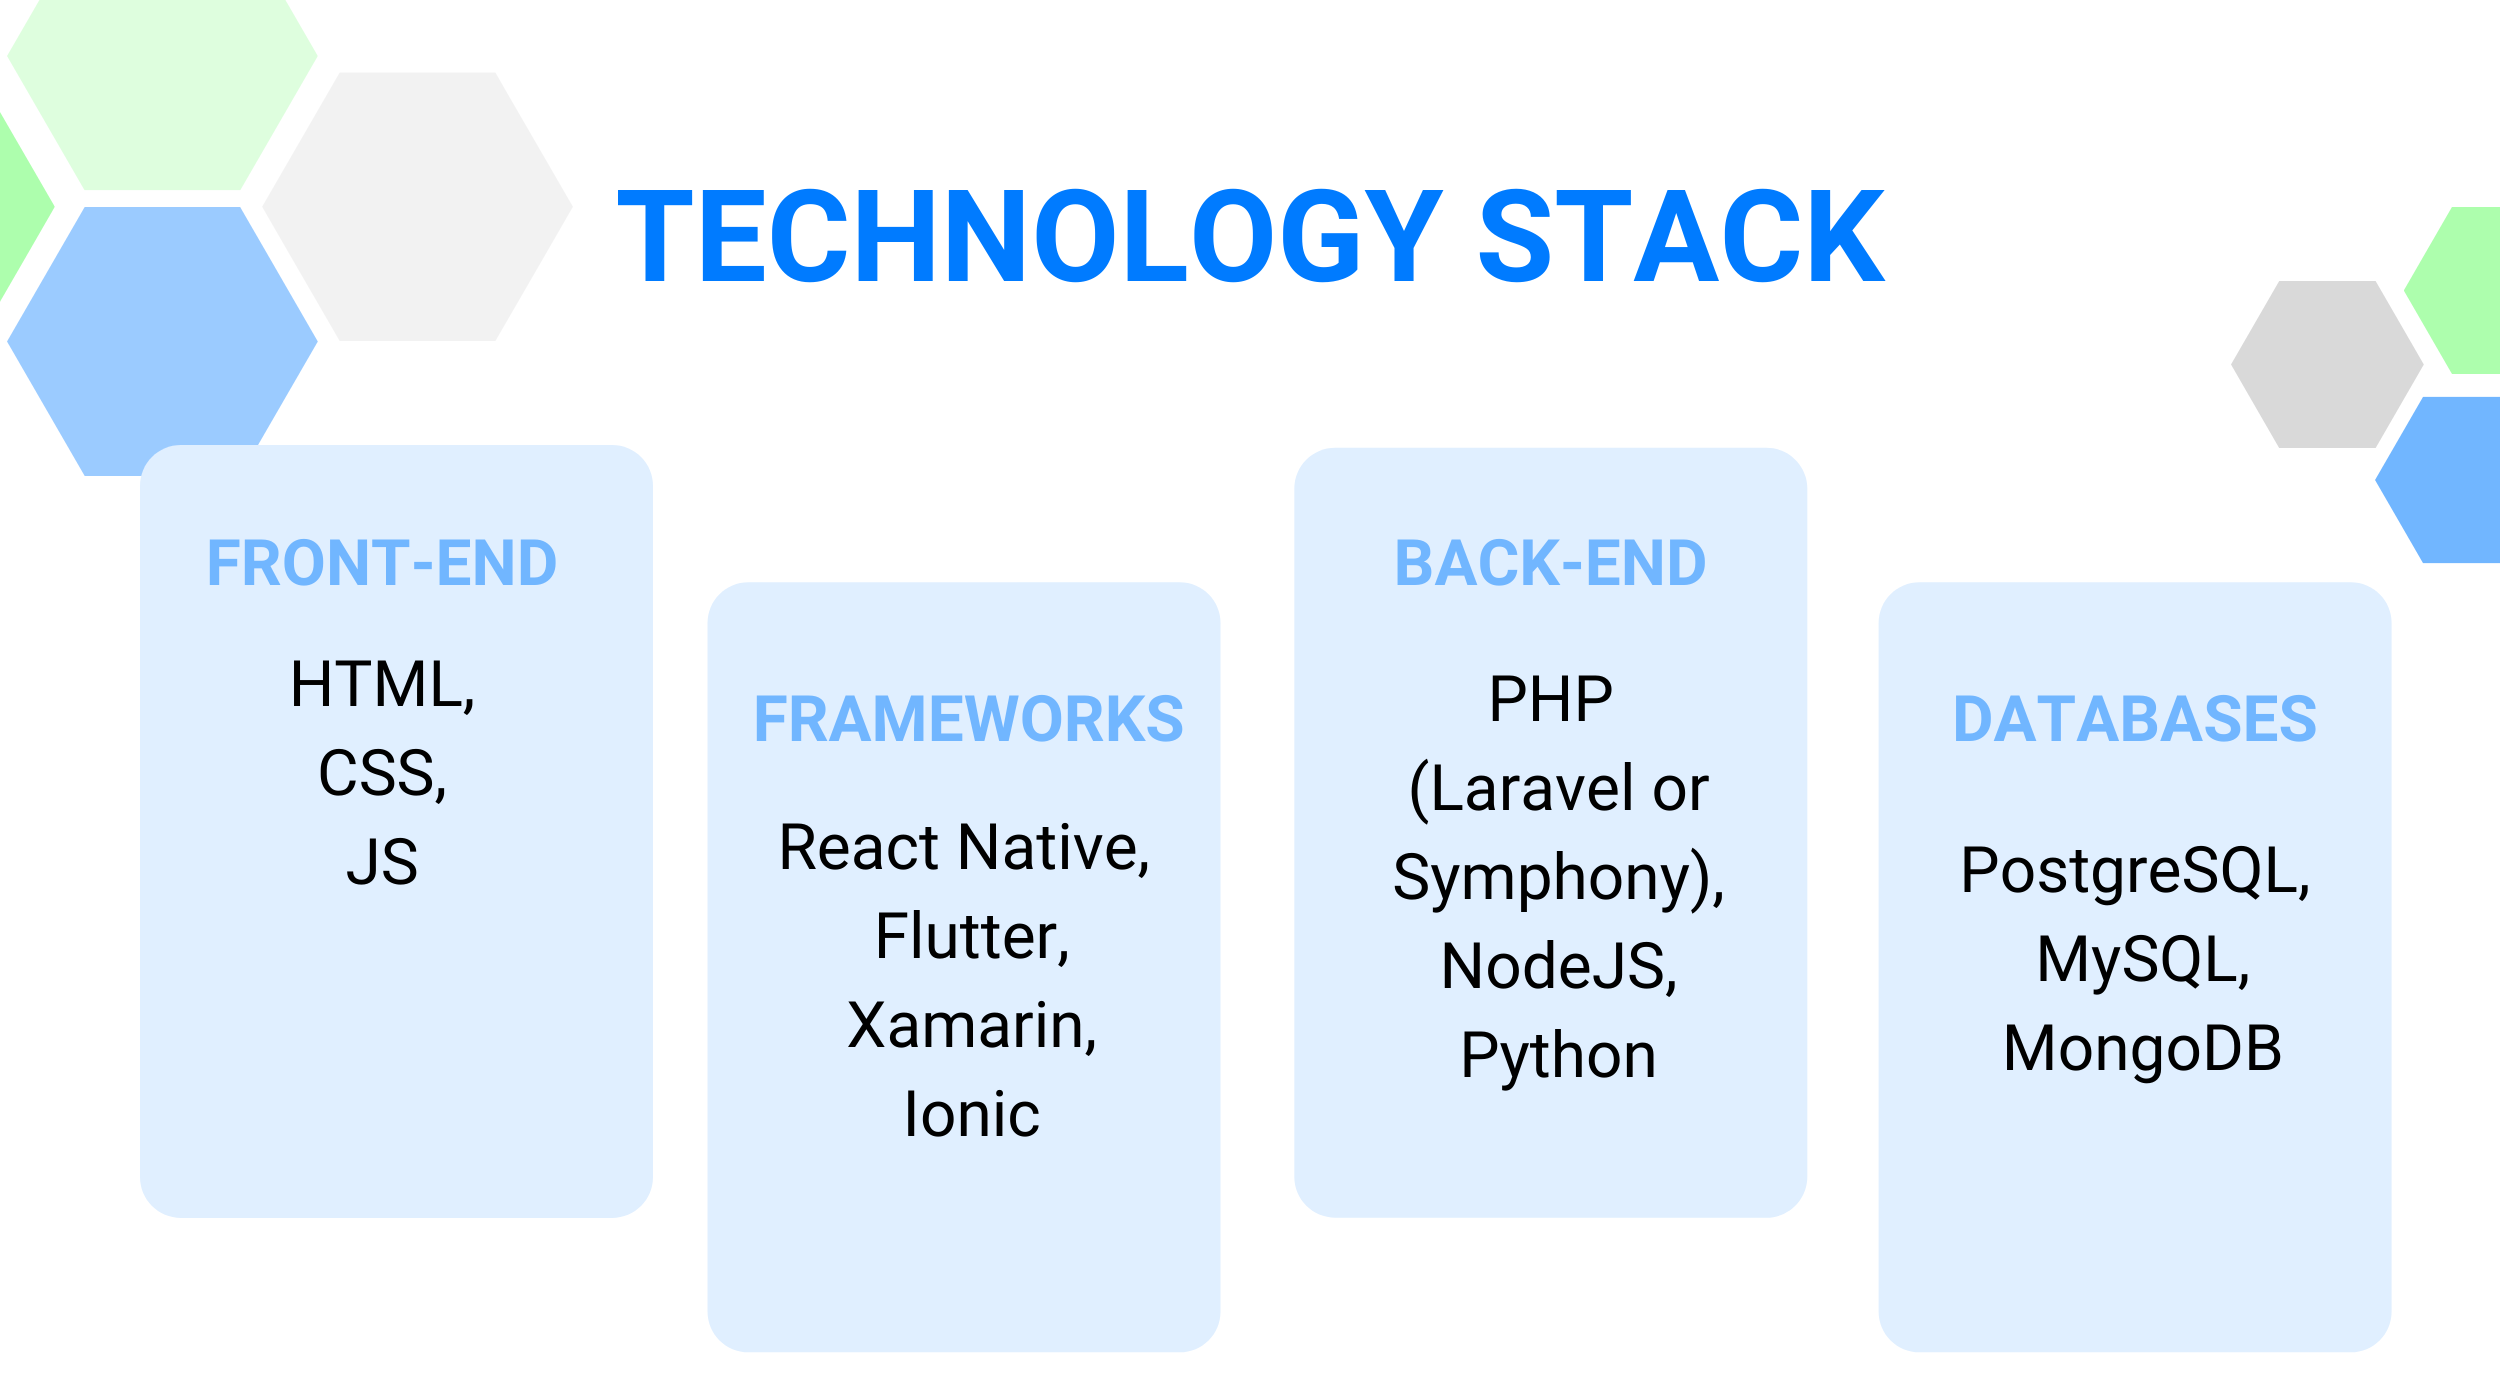 Technology stack